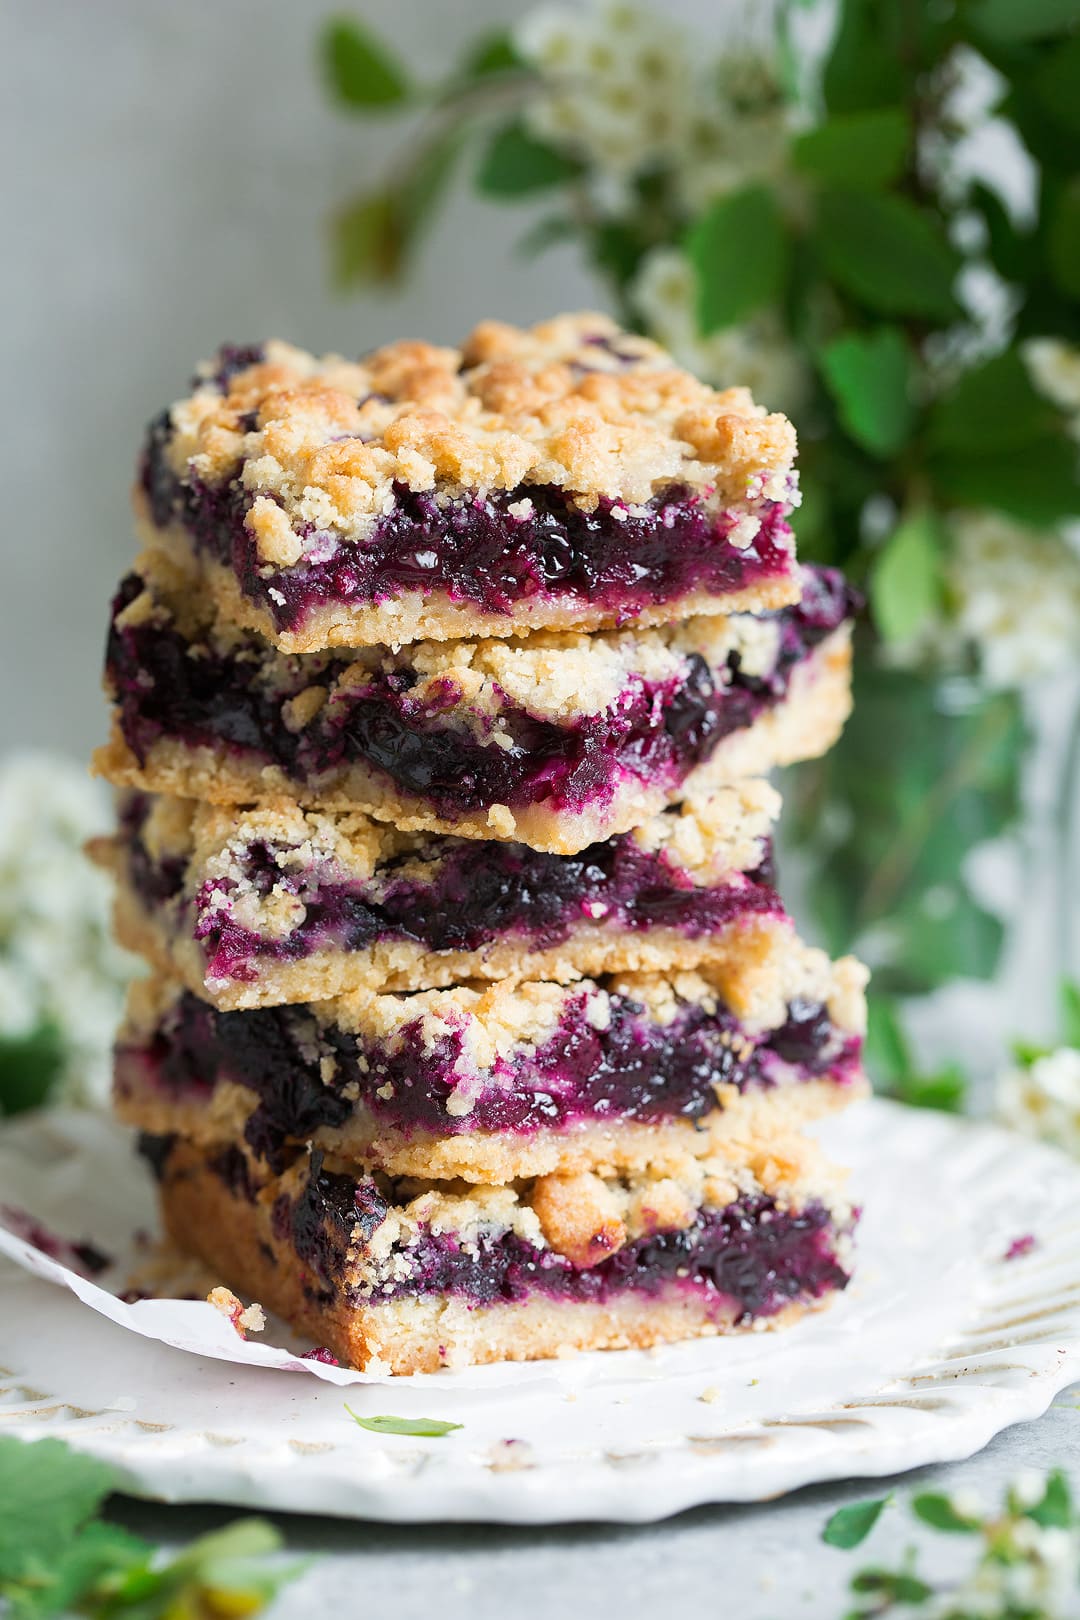 Blueberry Bars with Crumble Topping - Cooking Classy